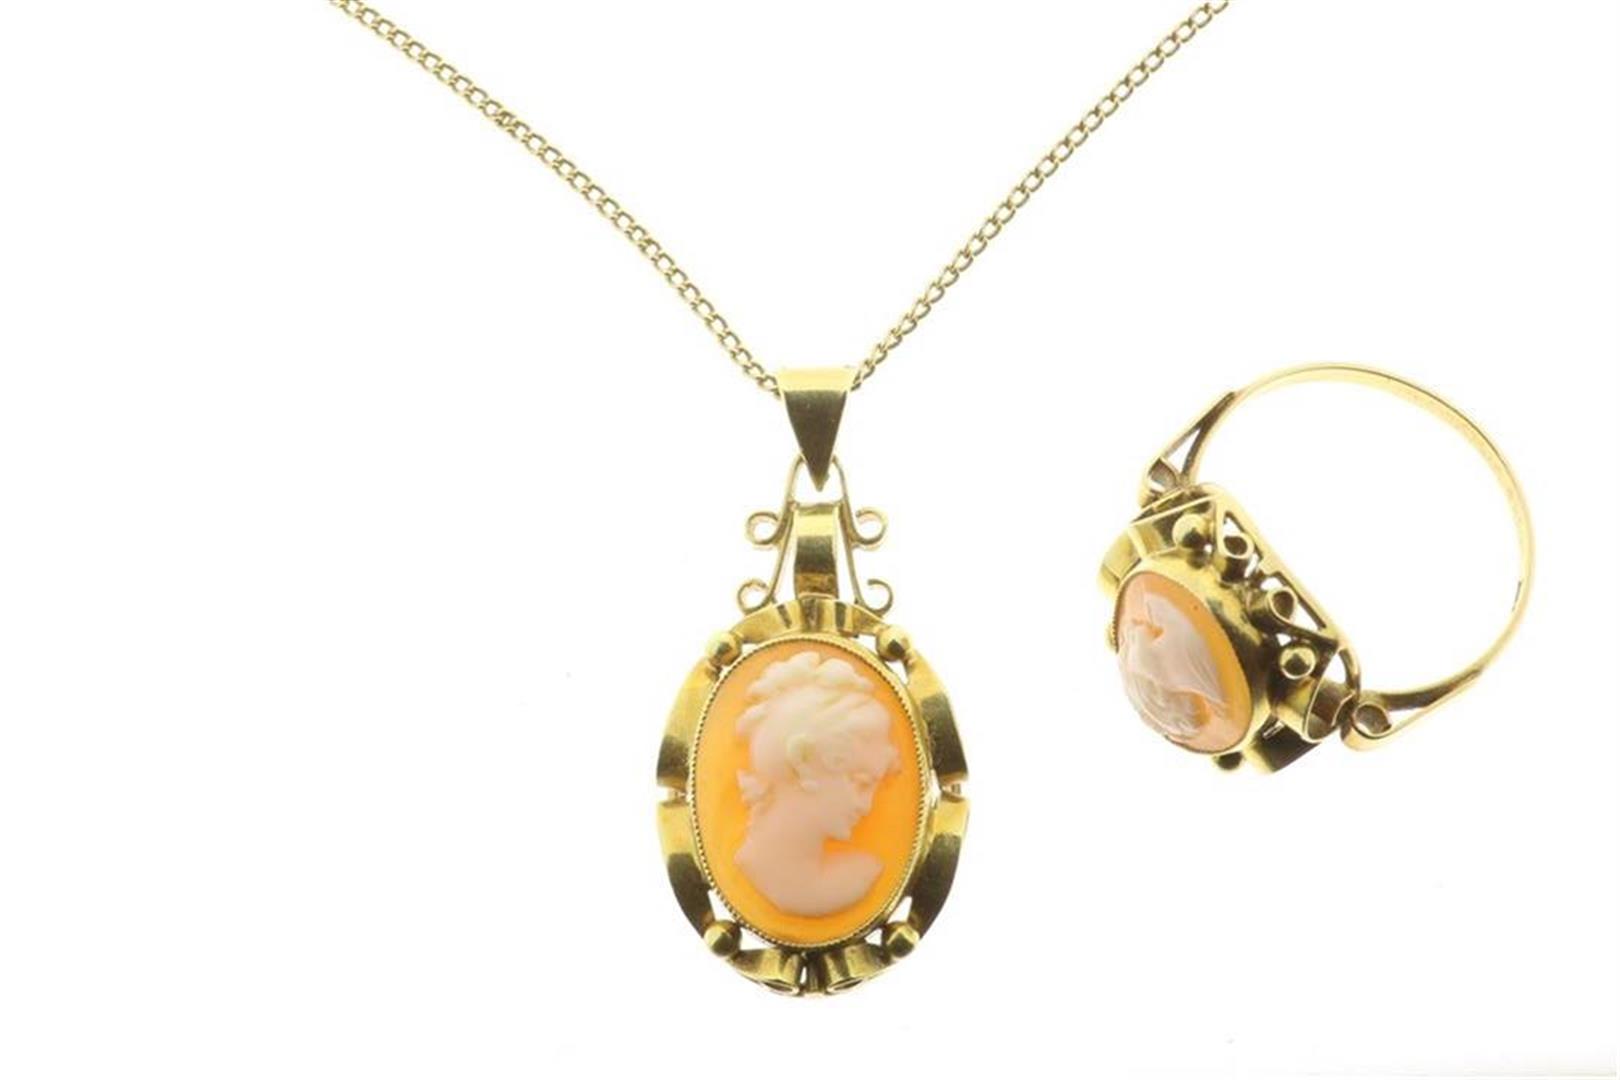 Yellow gold necklace with shell cameo, grade 583/000, length 47.5 cm. And a matching yellow gold